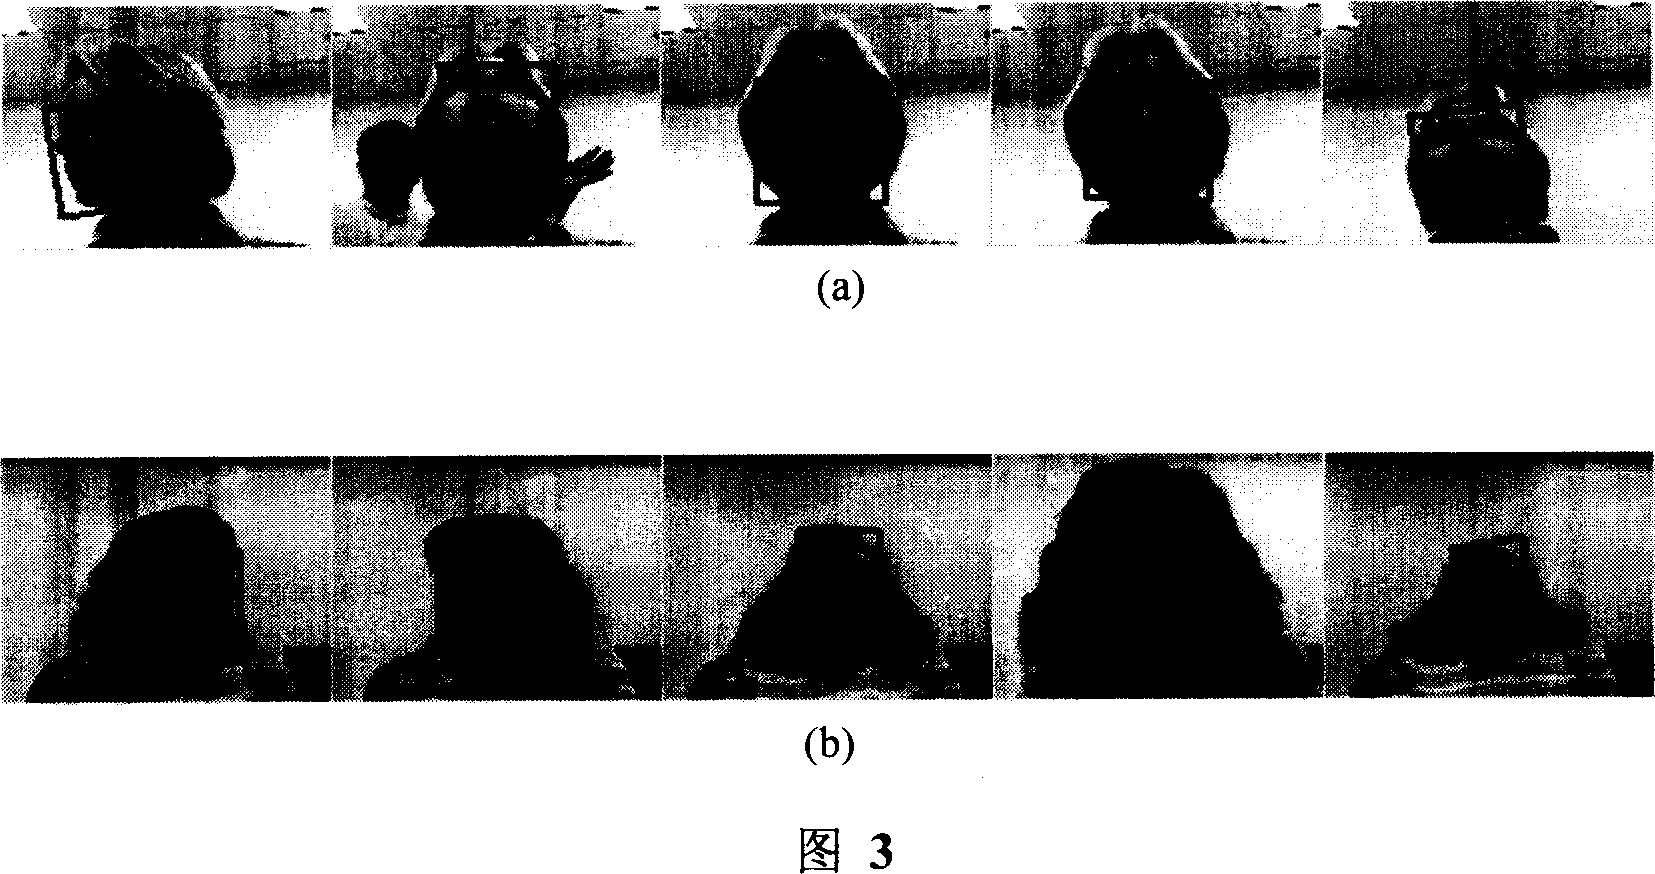 Visual frequency humary face tracking identification method based on appearance model